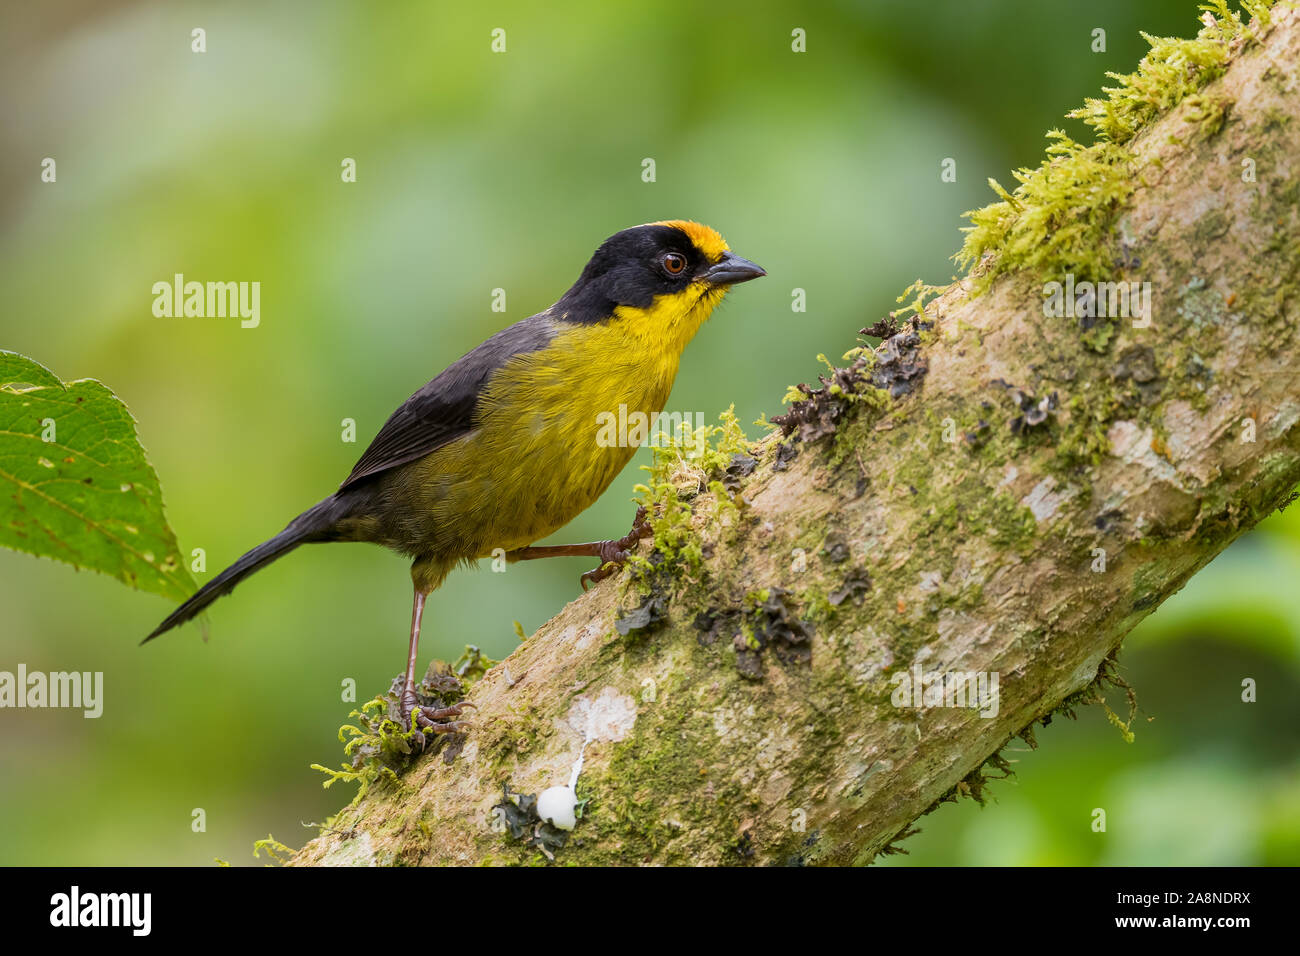 Pale-naped Brush-finch - Atlapetes pallidinucha, shy yellow and black brush-finch from Andean slopes of South America, Guango lodge, Ecuador. Stock Photo